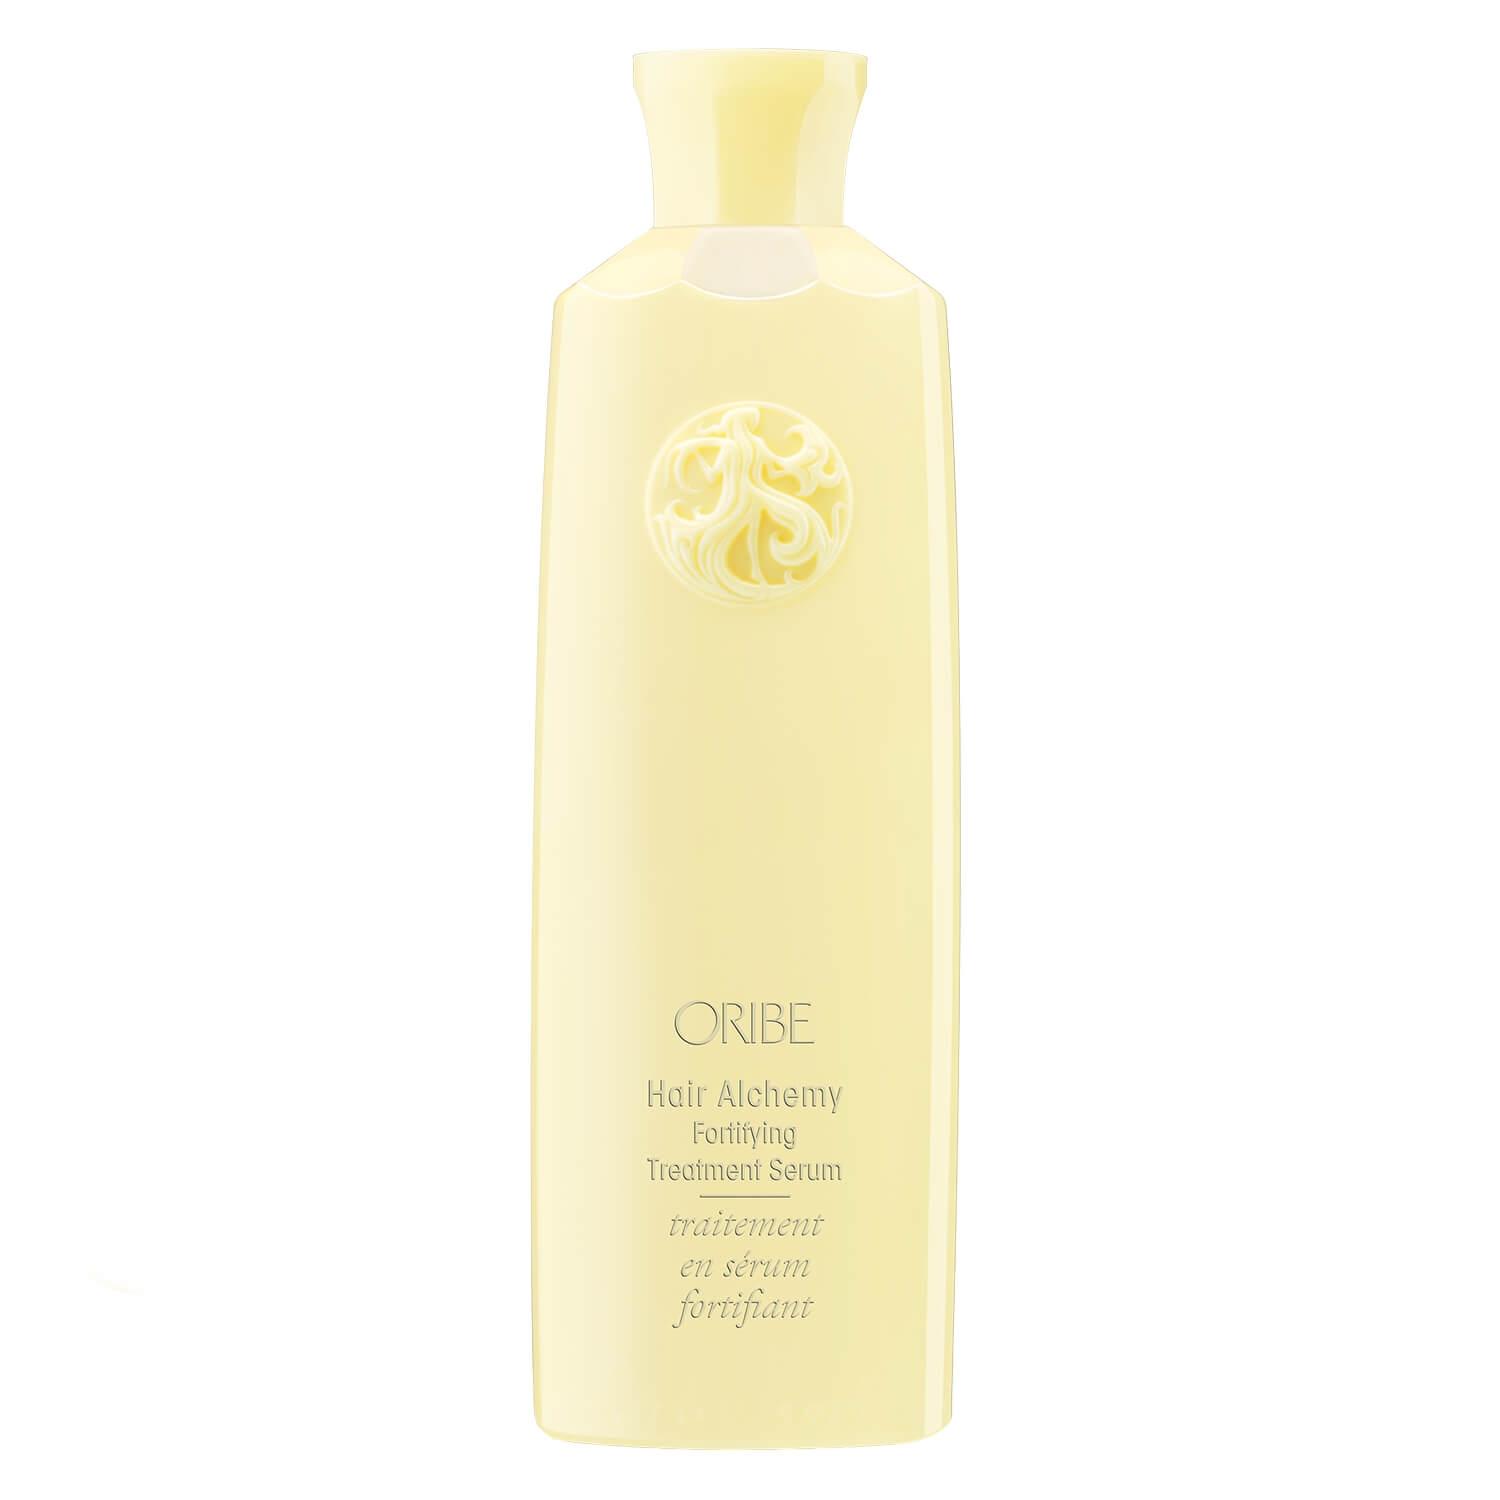 Product image from Oribe Care - Hair Alchemy Fortifying Treatment Serum